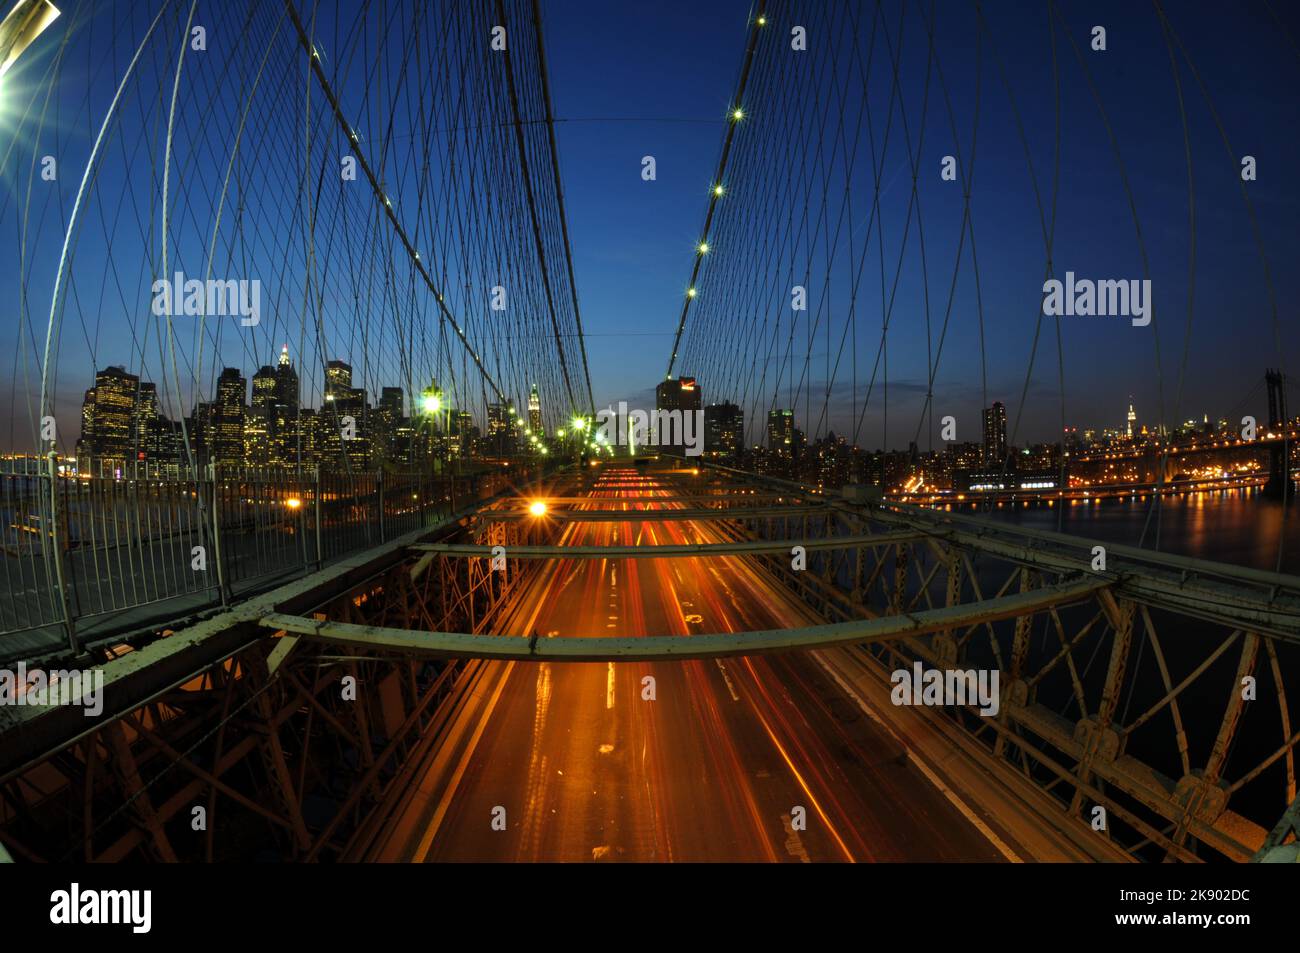 The suspender cables of Brooklyn Bridge and illuminated road at night. New York, USA. Stock Photo